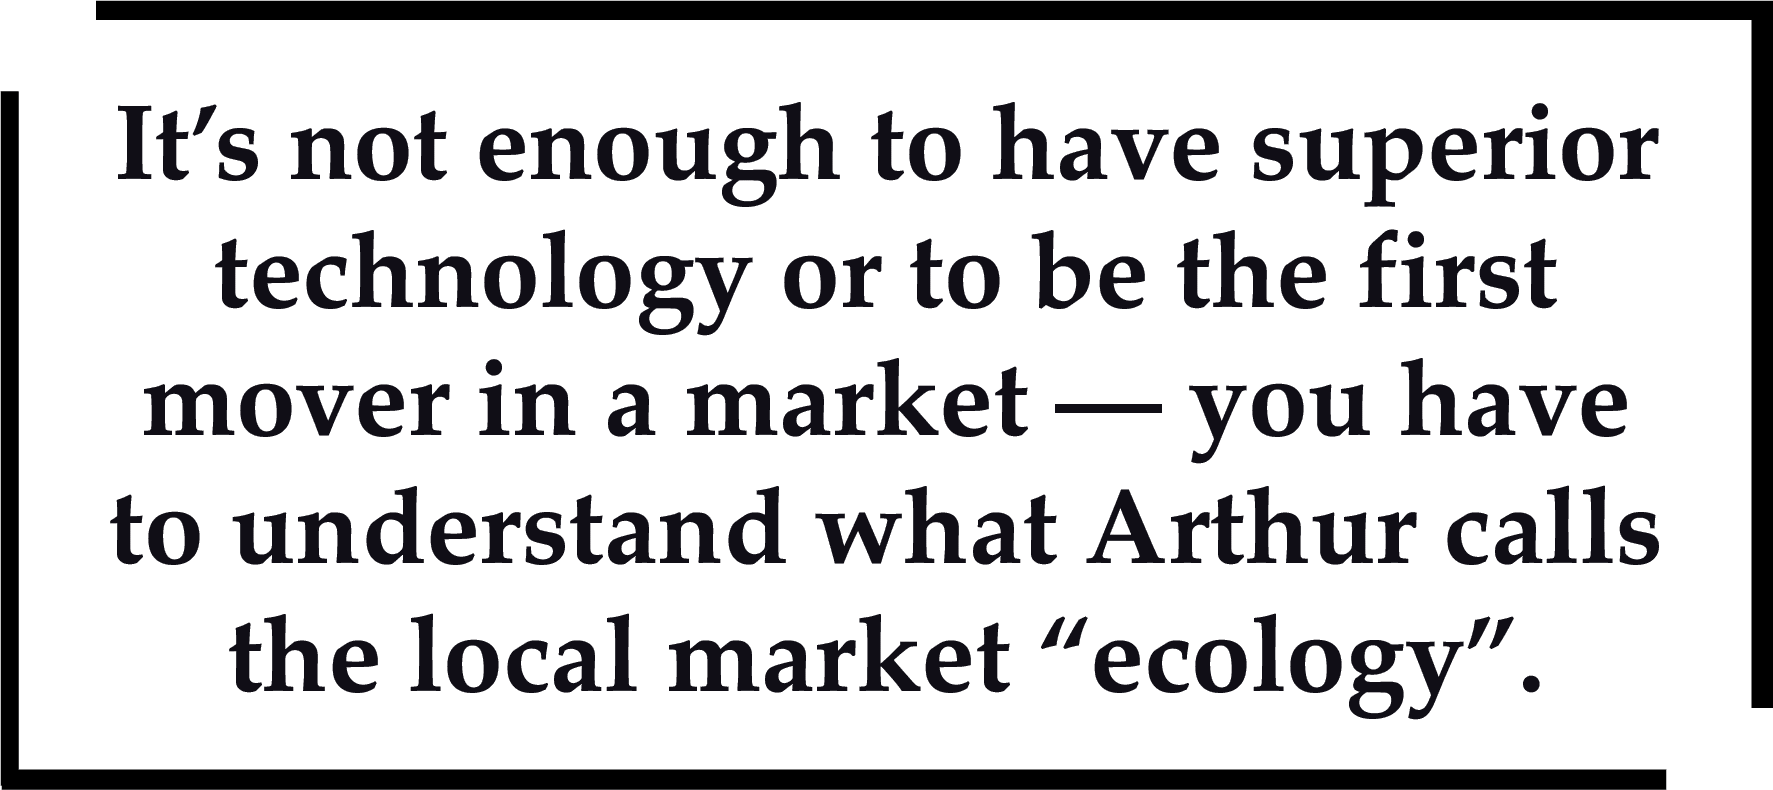 It's not enough to have superior technology or to be the first mover in a market - you have to understand what Arthur calls the local market